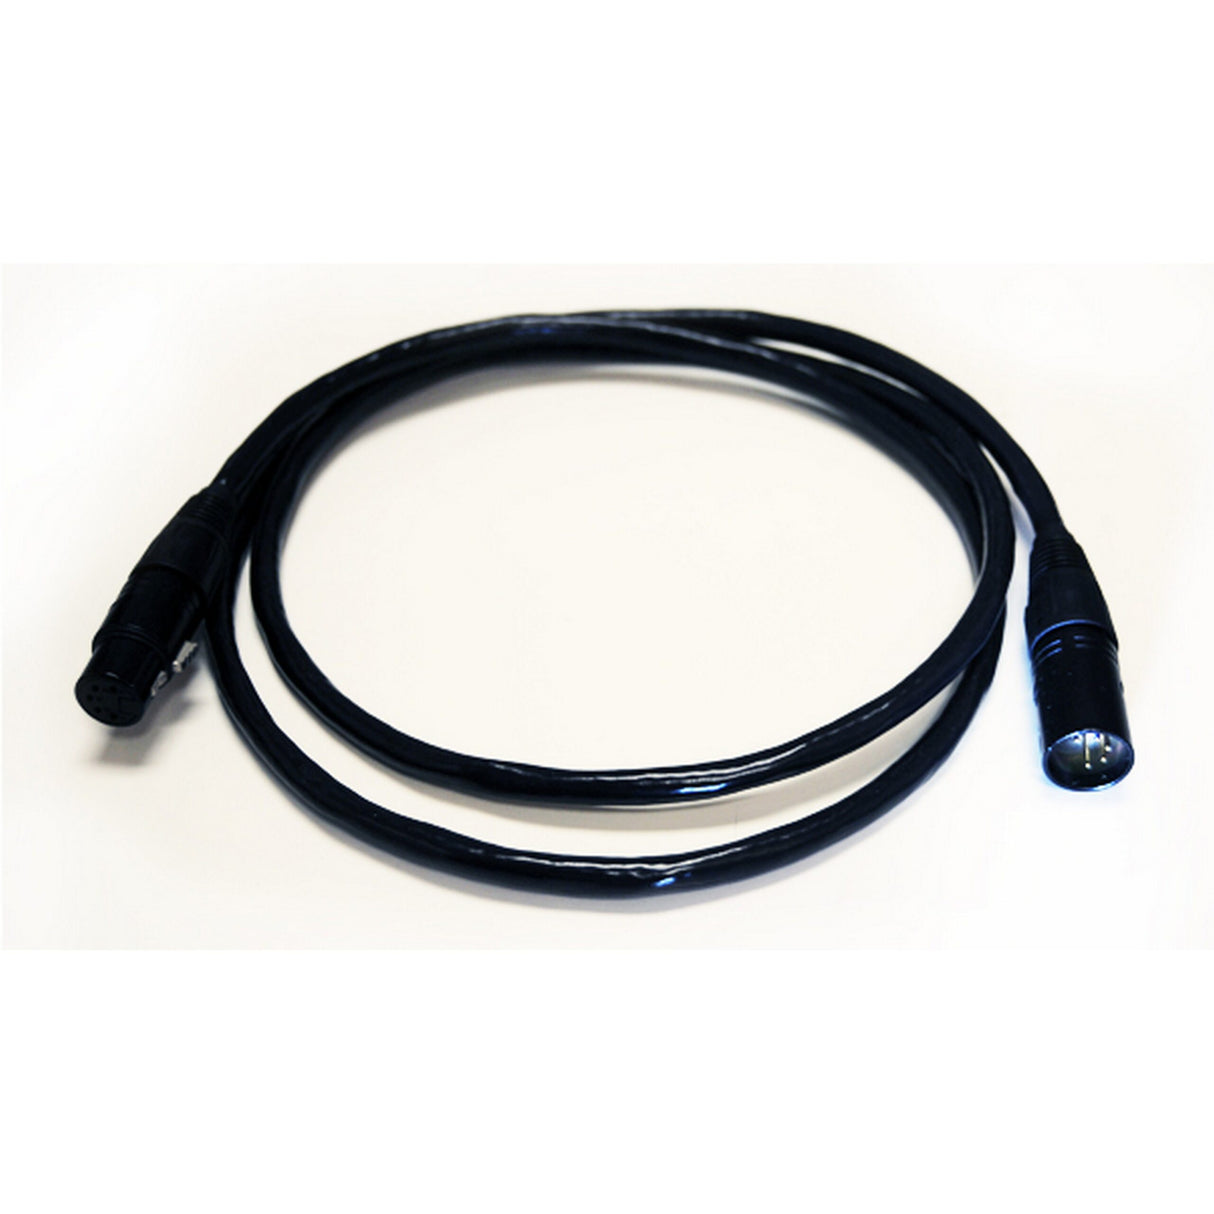 Whirlwind DMX100 DMX 5-Pin XLRF to XLRM Cable, 100-Feet